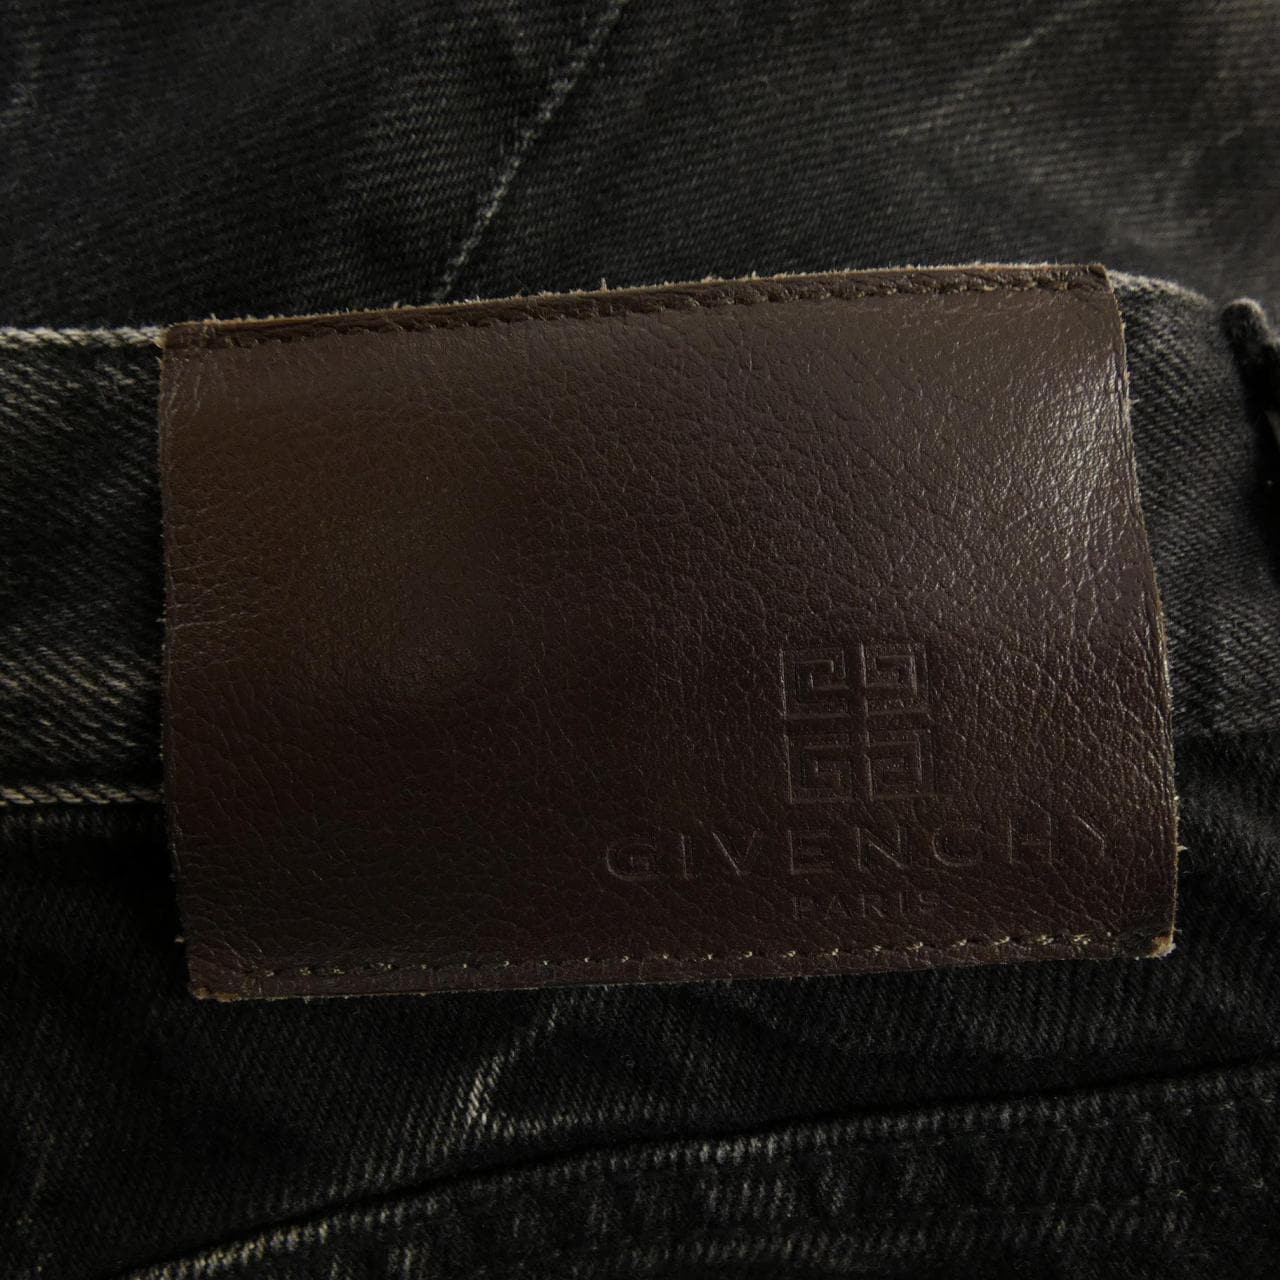 GIVENCHY jeans